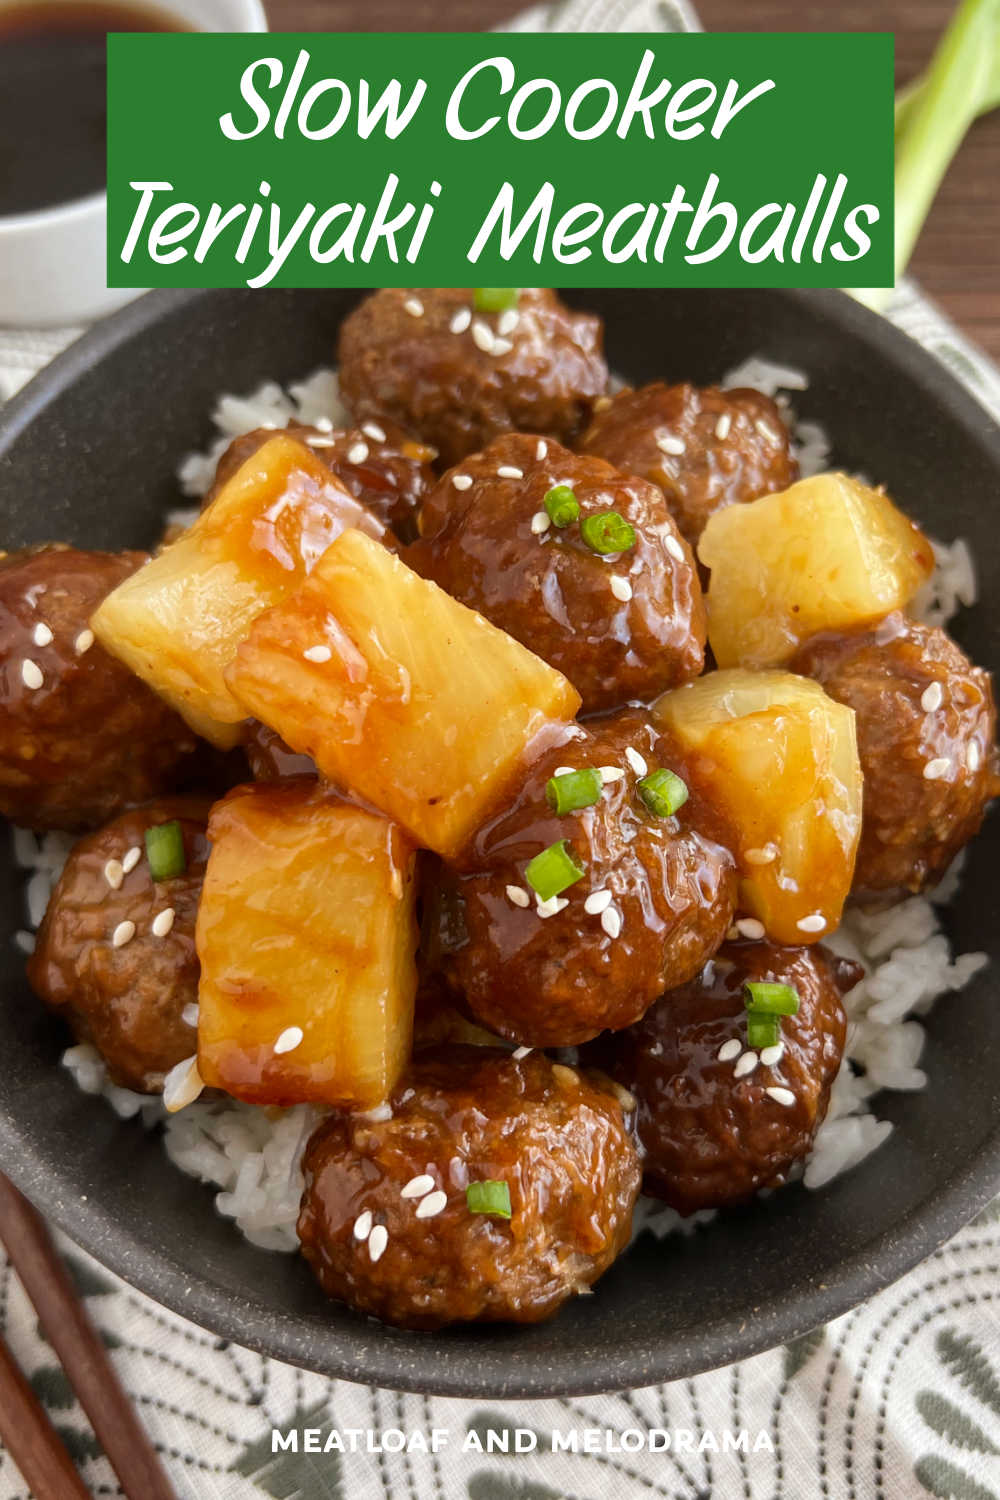 Slow Cooker Teriyaki Pineapple Meatballs is an easy recipe with frozen meatballs, teriyaki sauce and pineapple chunks made in the crock pot. This family favorite is perfect for busy weeknights! via @meamel